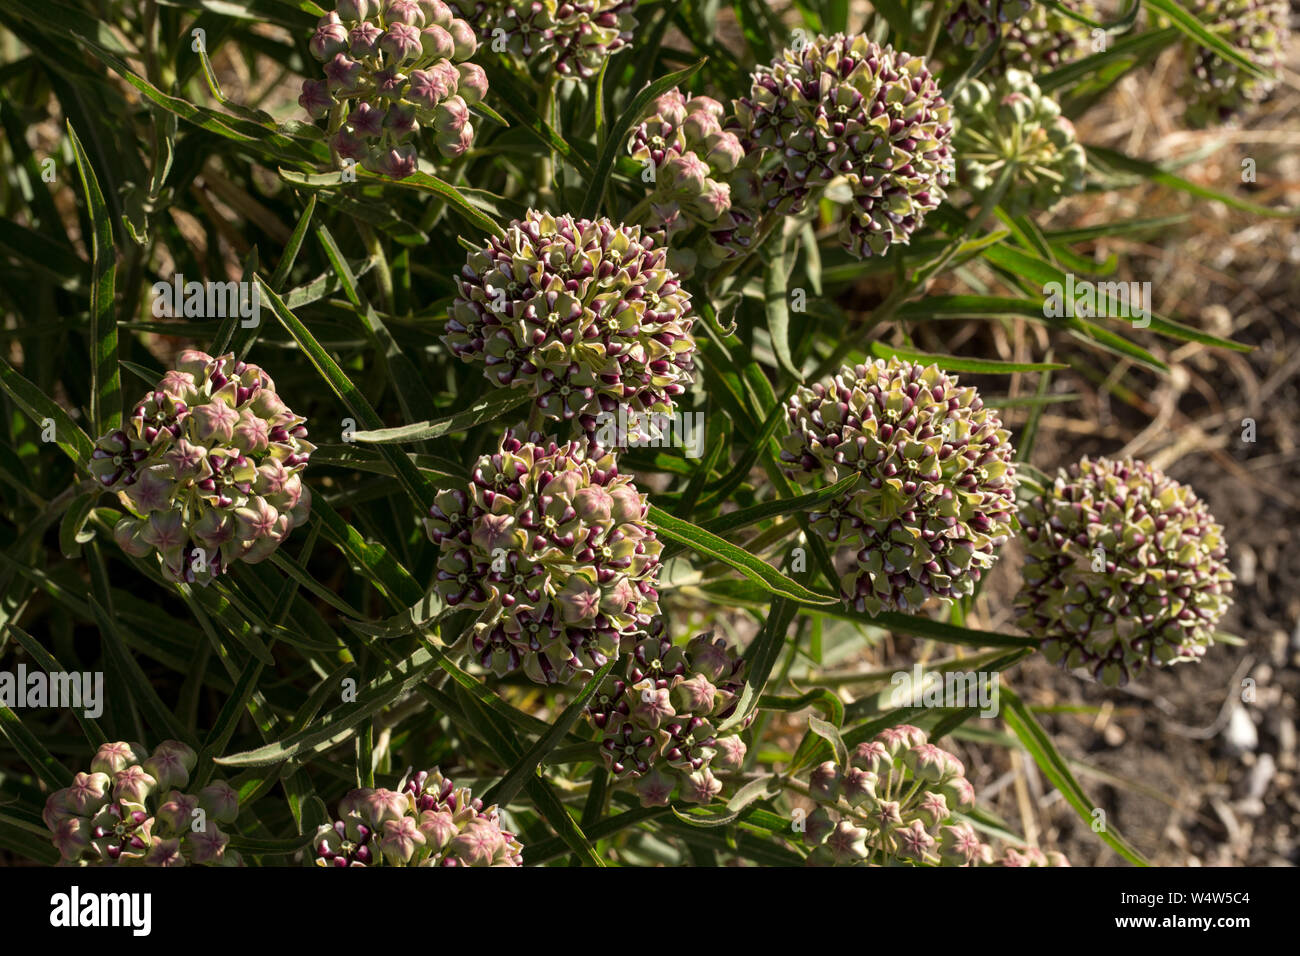 Antelope horn milkweeds bloom along roadsides during the early spring in the Chihuahuan Desert. Stock Photo